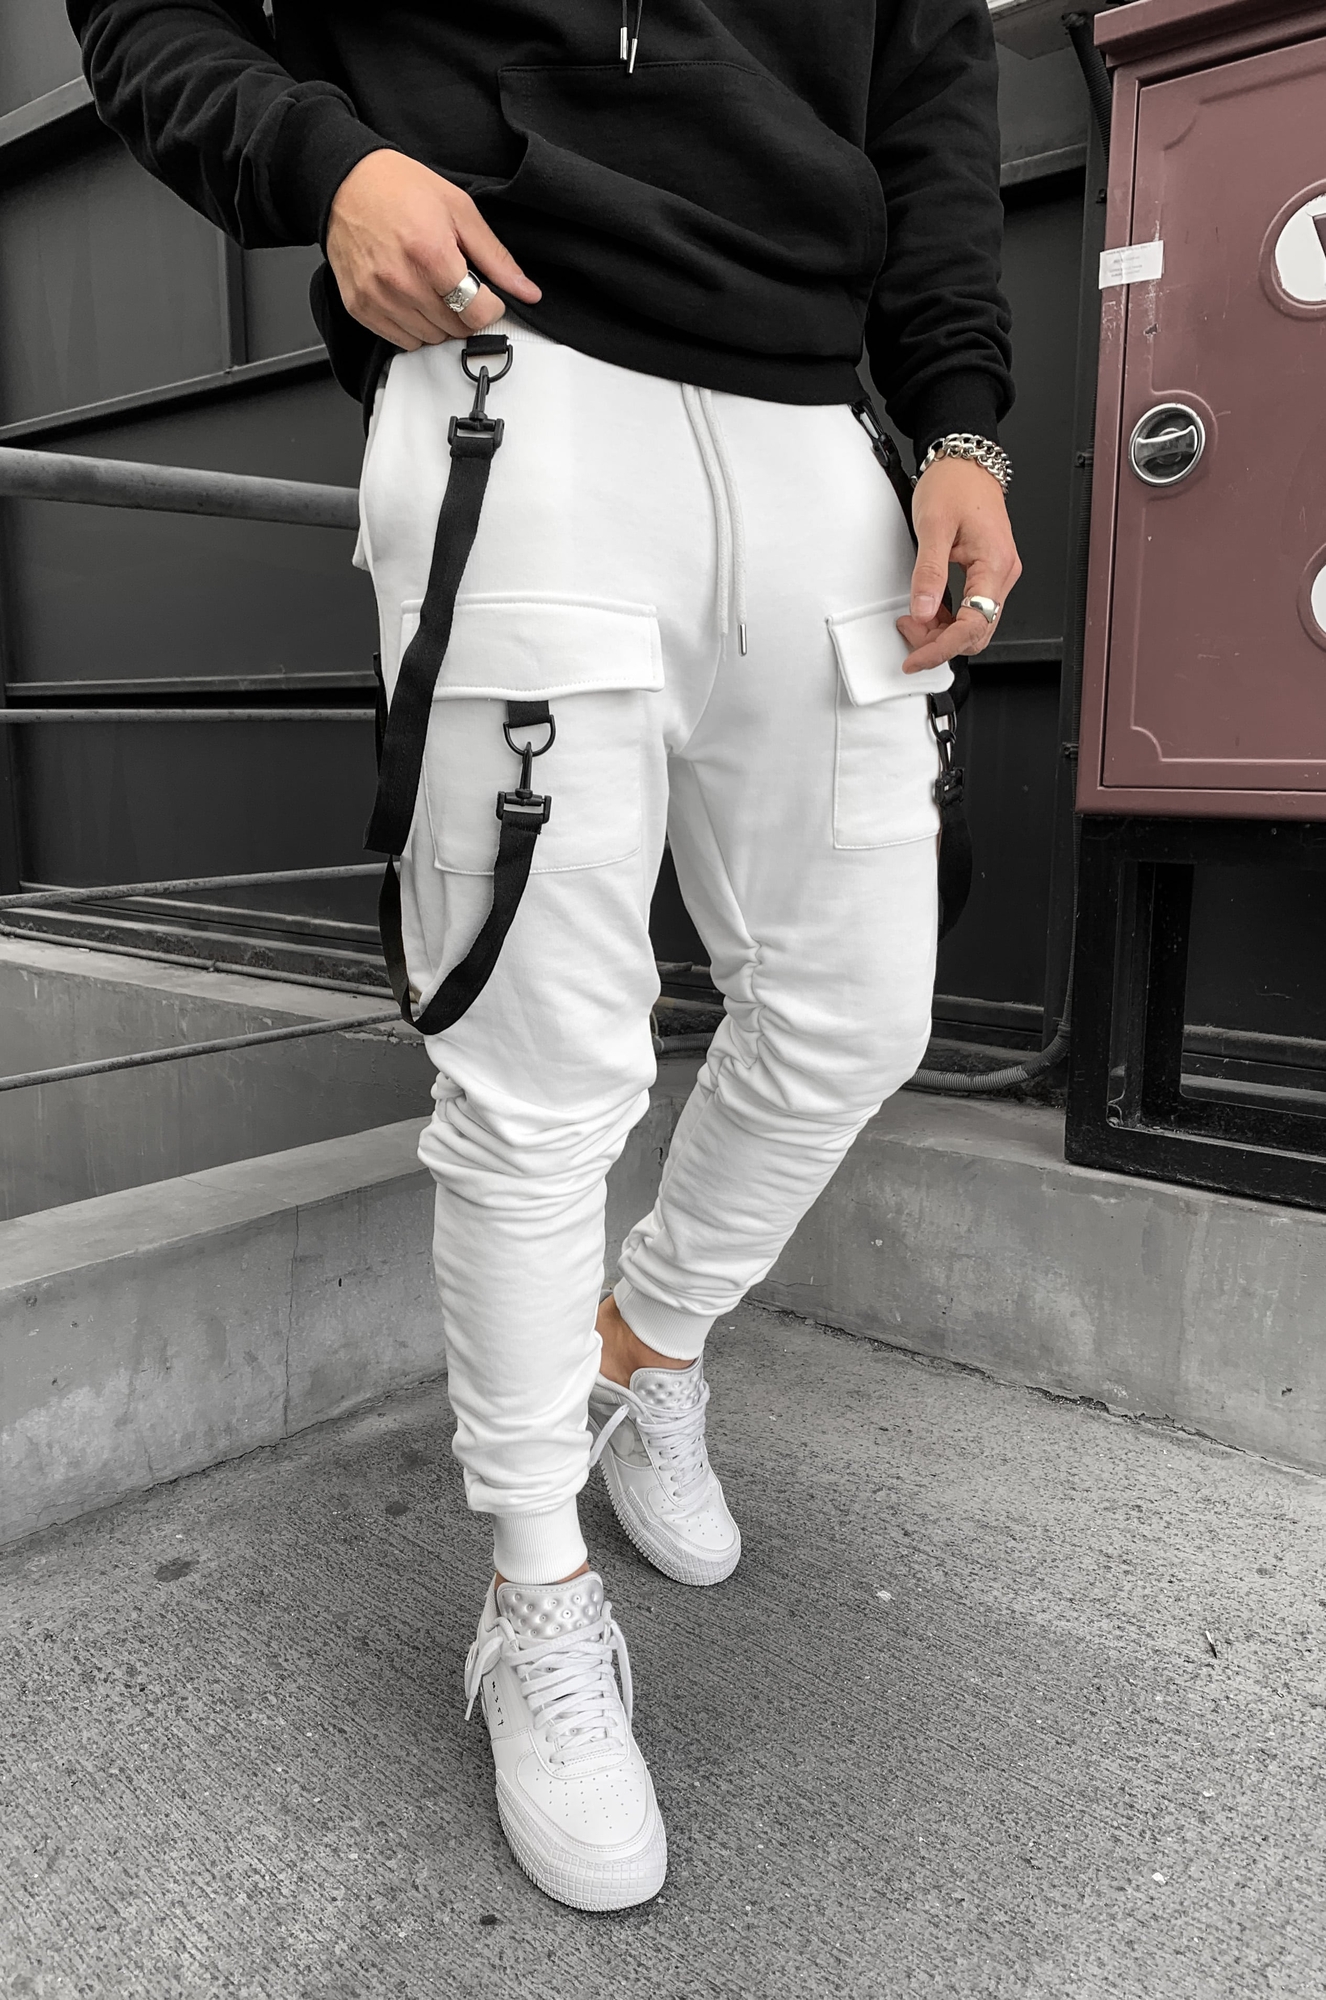 Sophisticated and Beautiful White Pants Outfit Styles Every Lady Should See